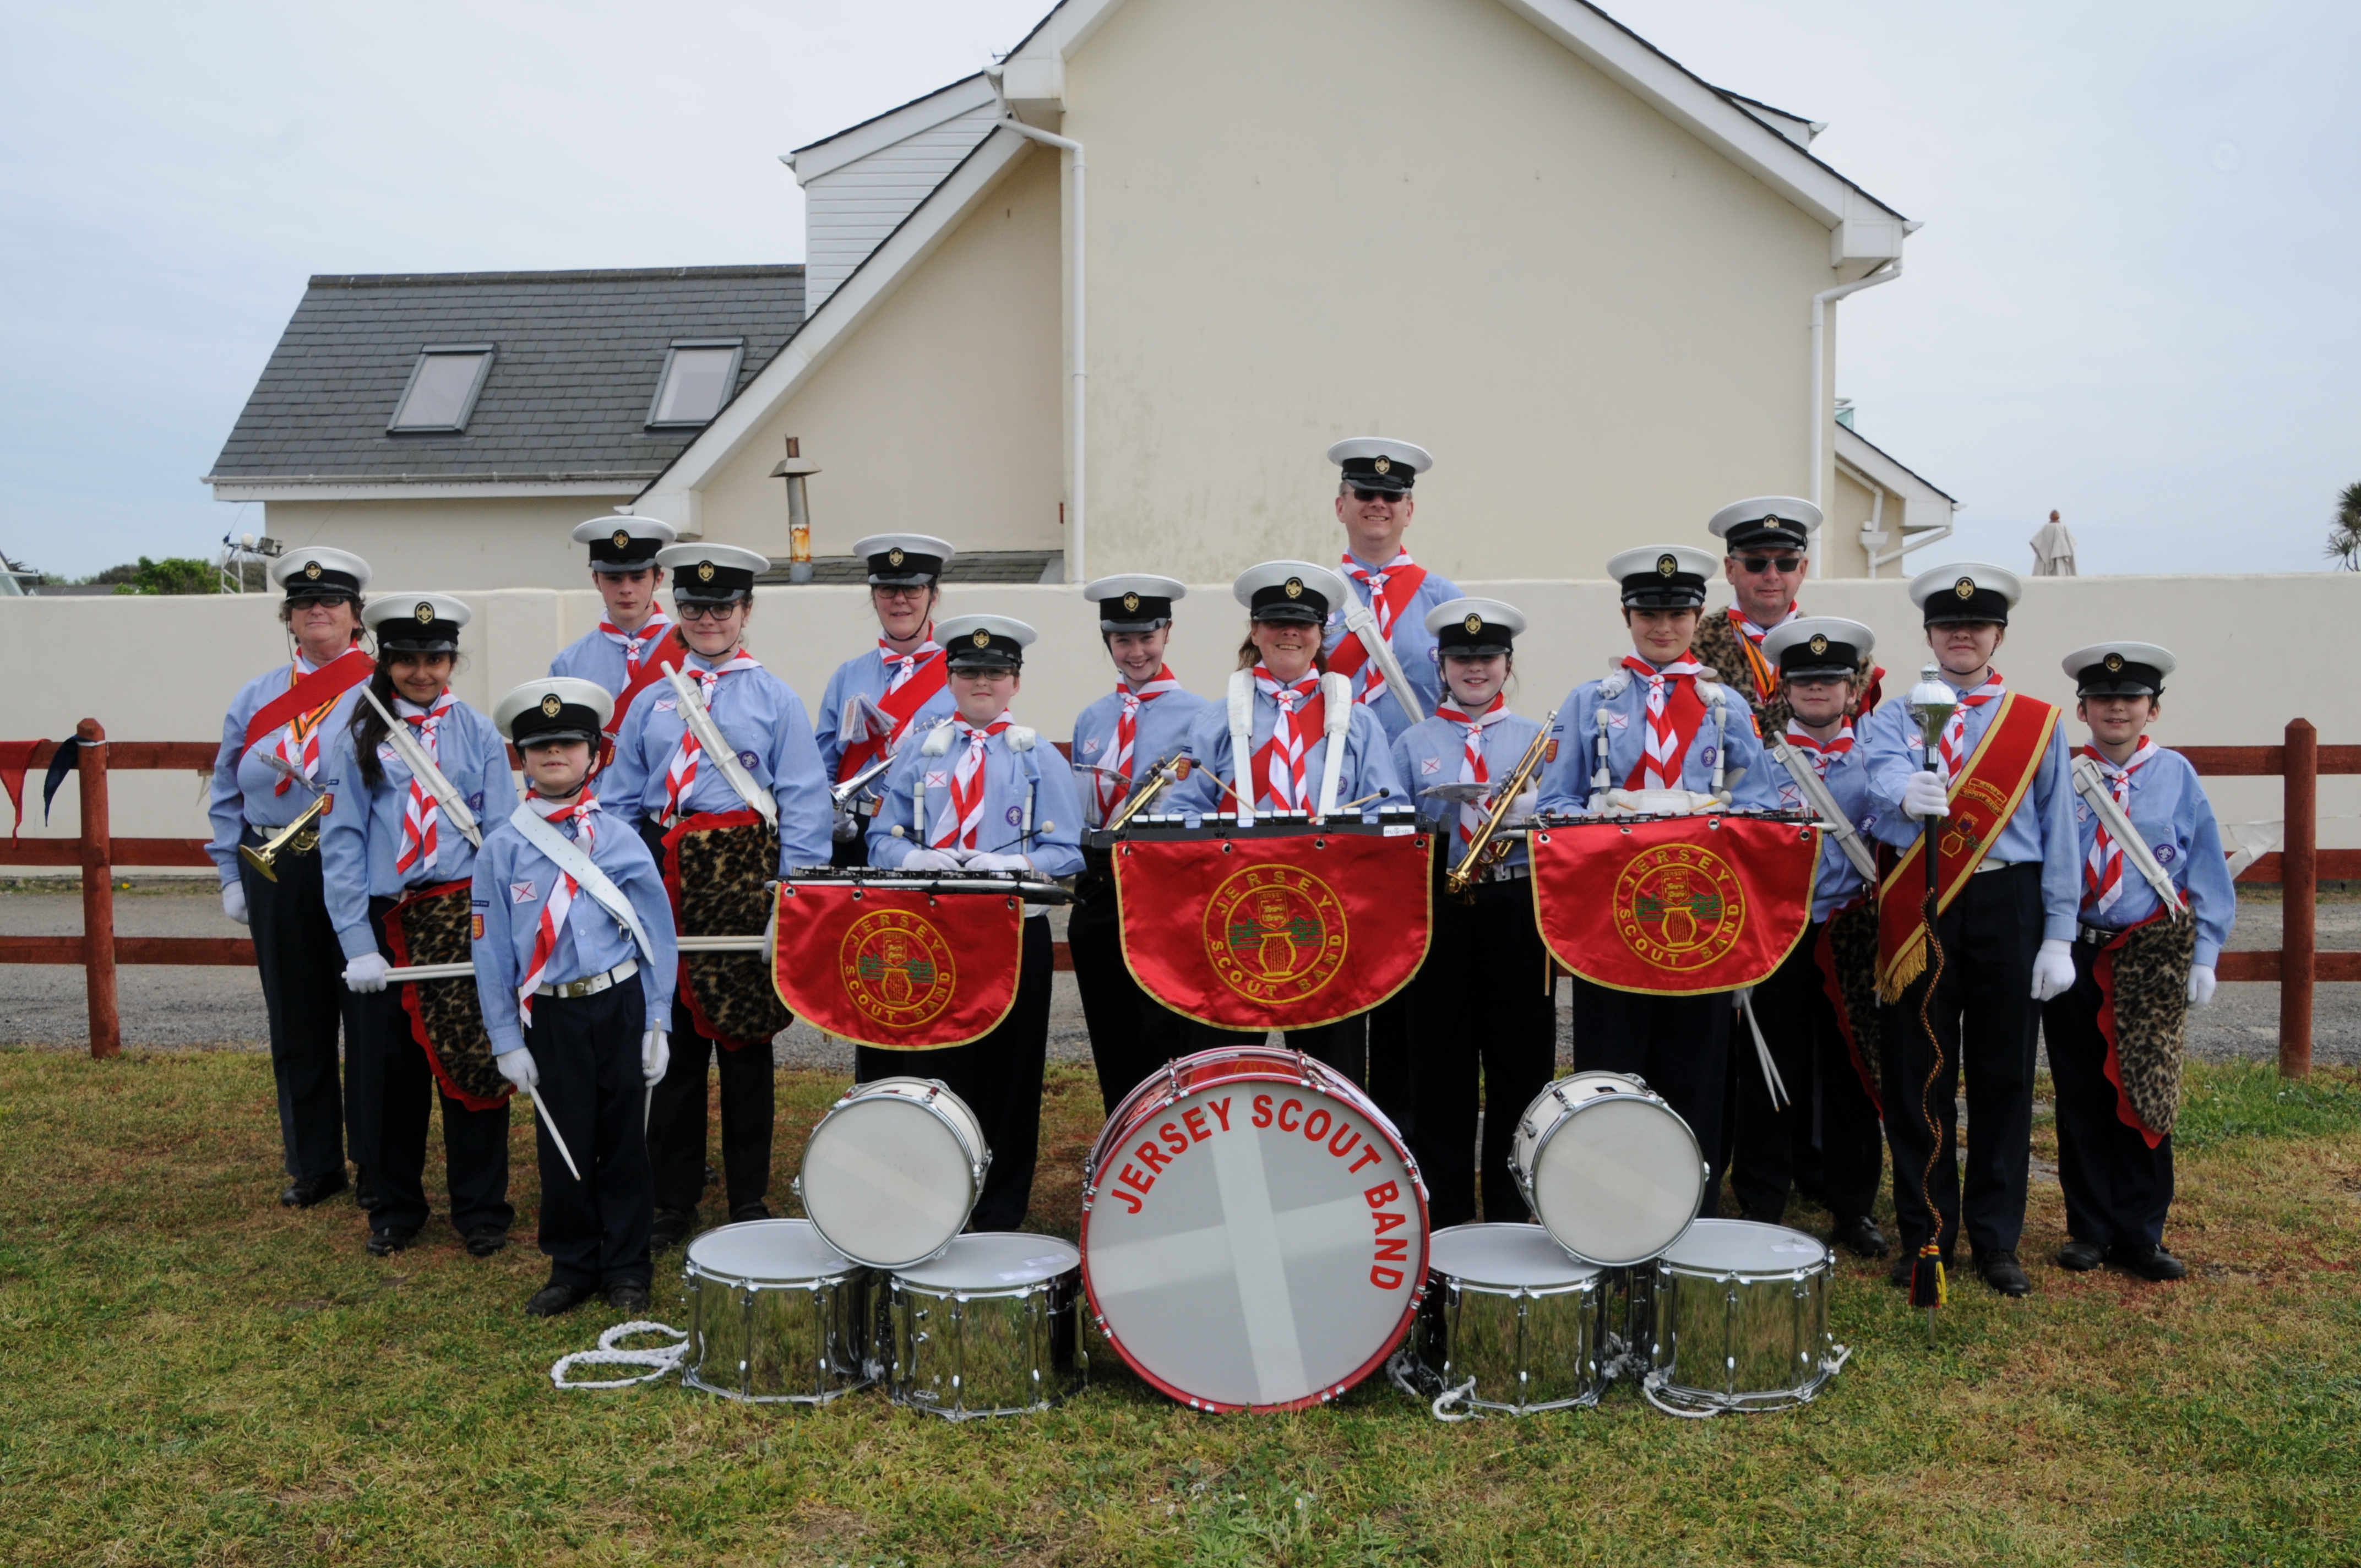 Jersey Scout Band